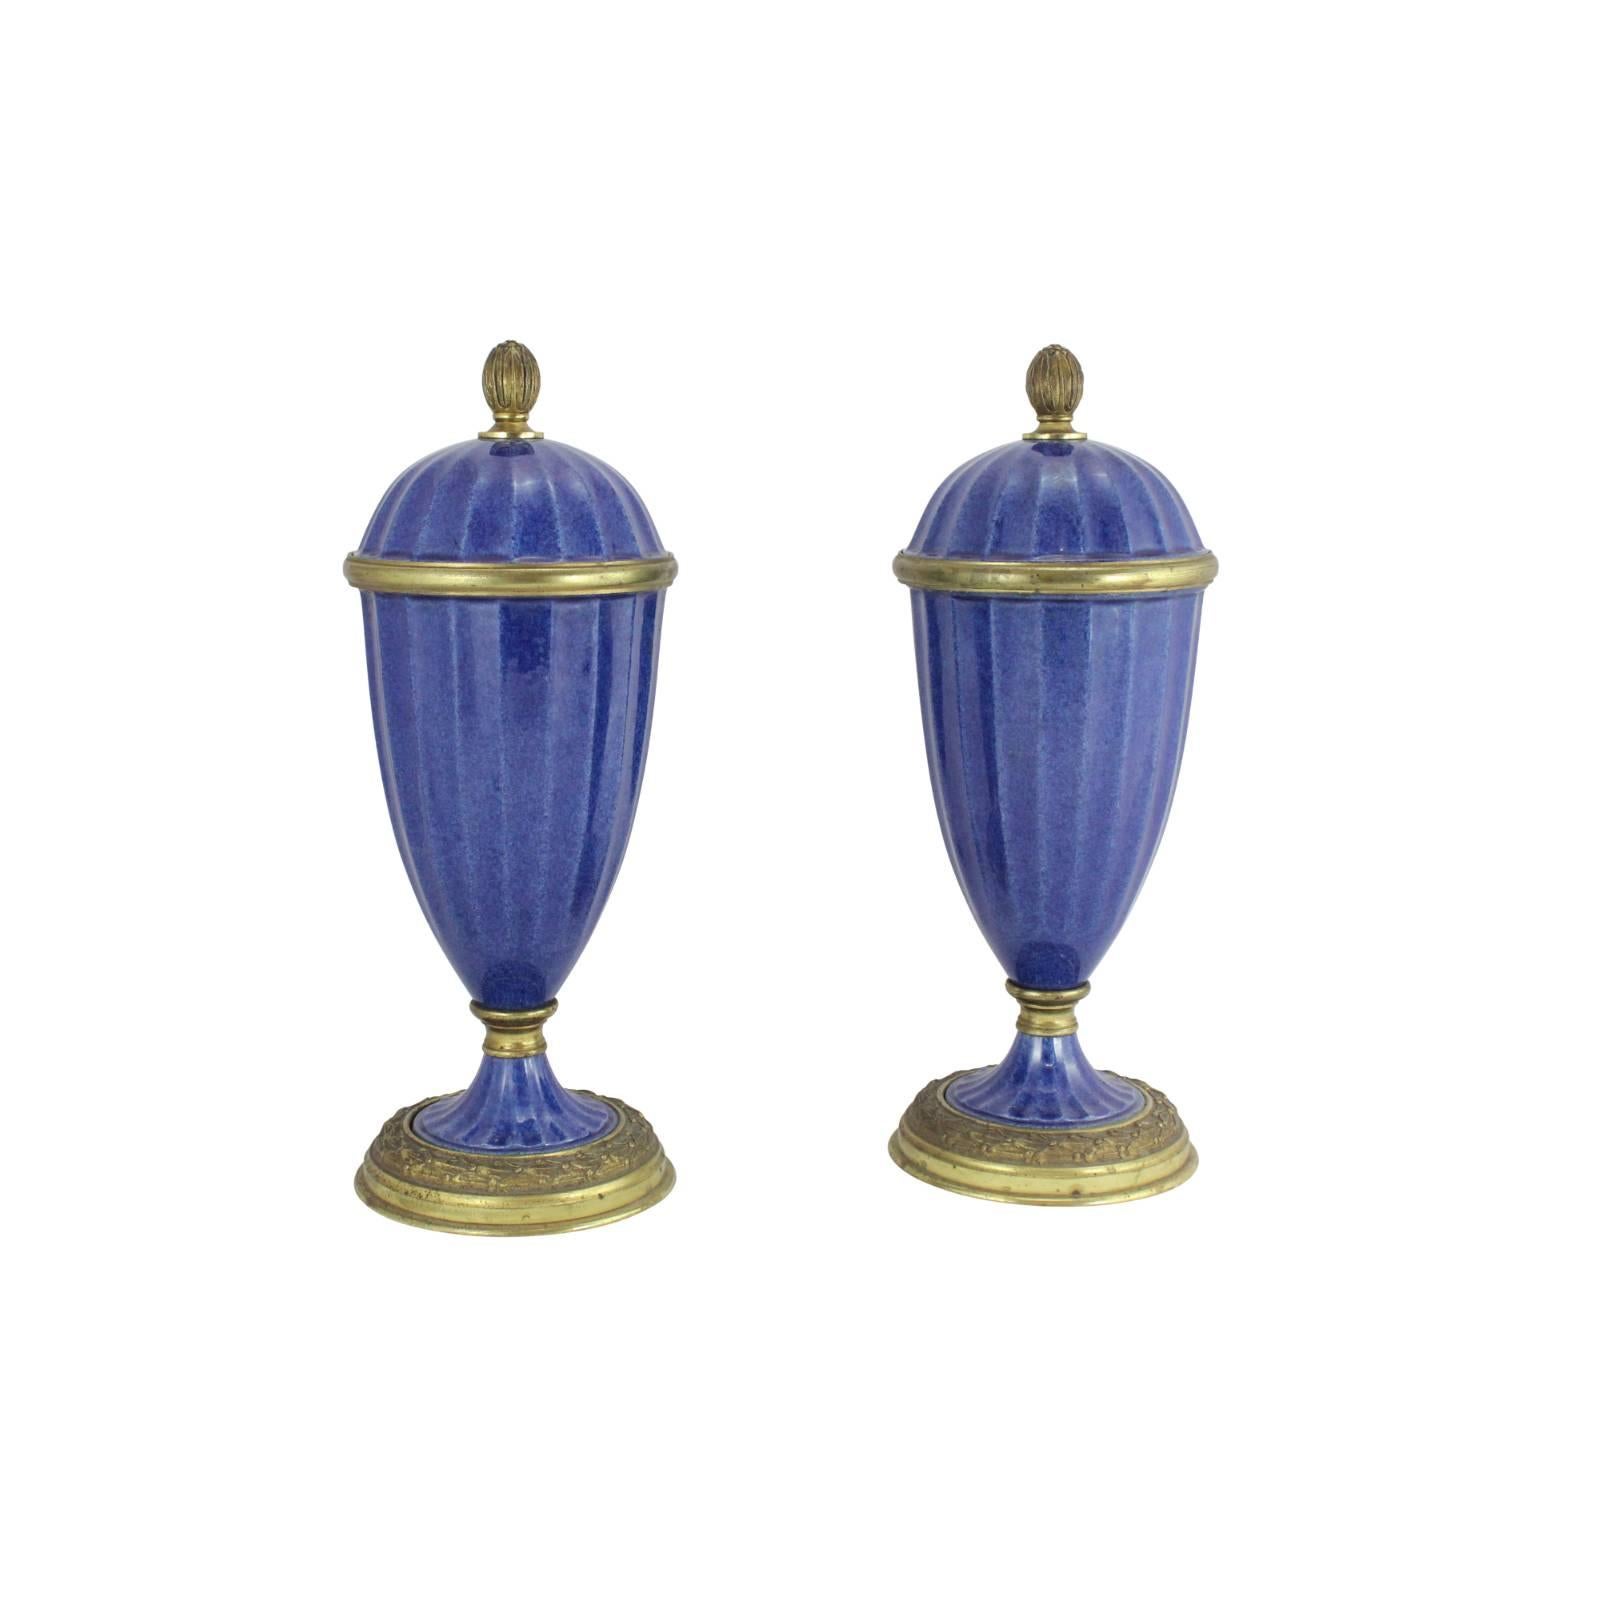 This beautiful pair of garniture with its lapis blue porcelain and gilt bronze mounts dates to between 1911 and 1930 from Sevres in France.
Here, the renowned designer Paul Milet, shows off his signature style with confidence and finesse. Standing